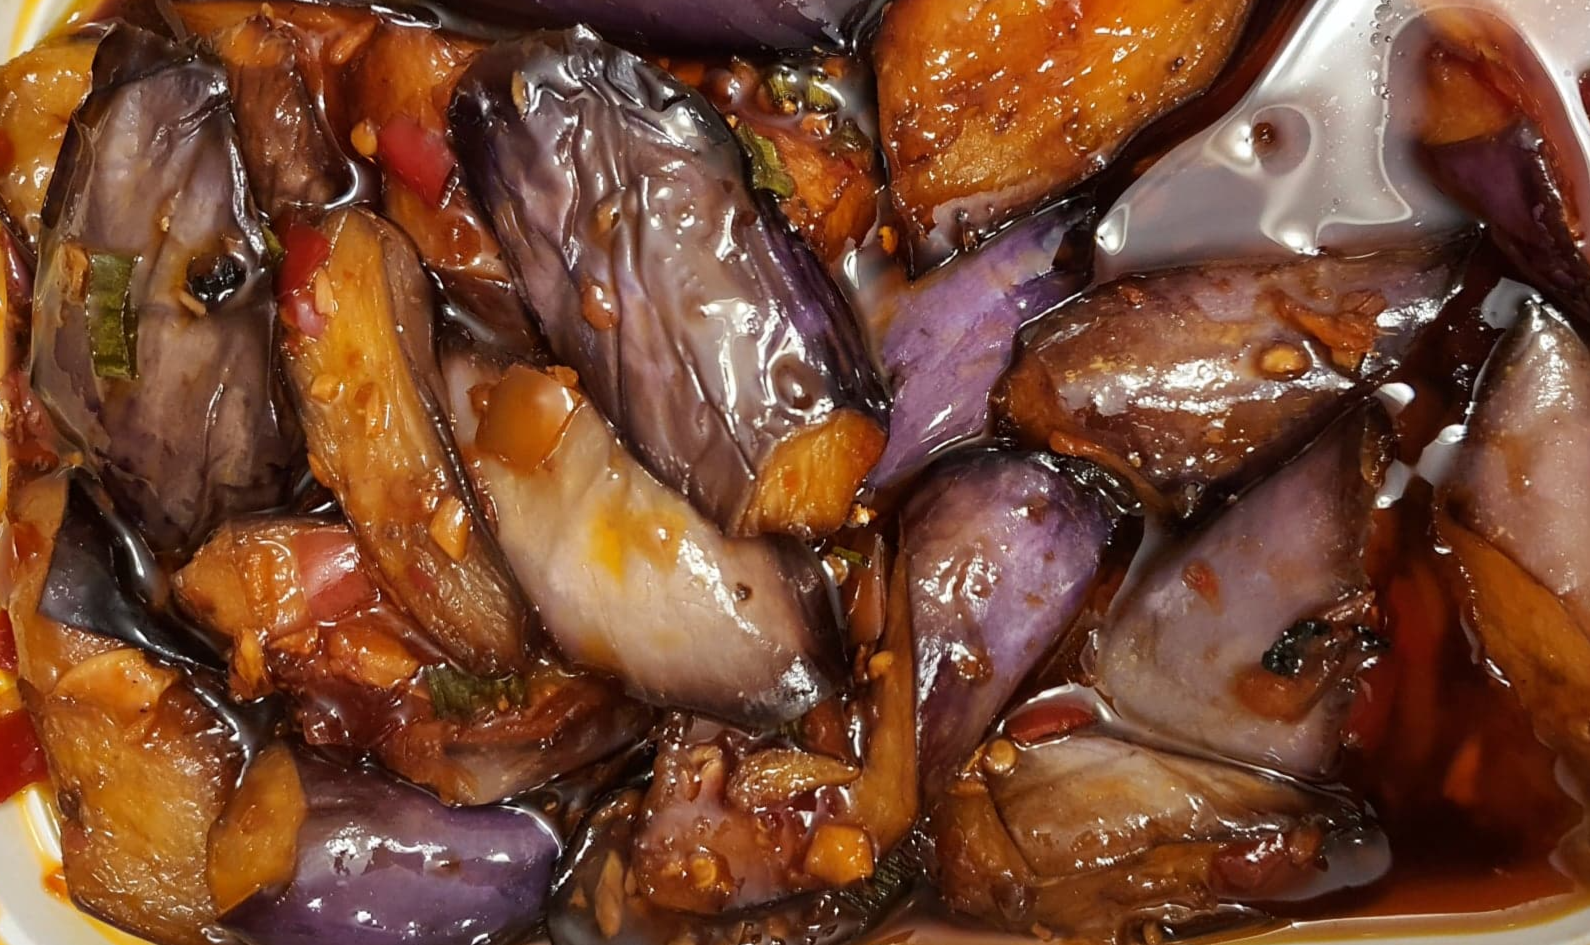 A very close up photo of the eggplant dish which is saucy and hard to tell that it's eggplant. Photo by Da Yeon Eom.